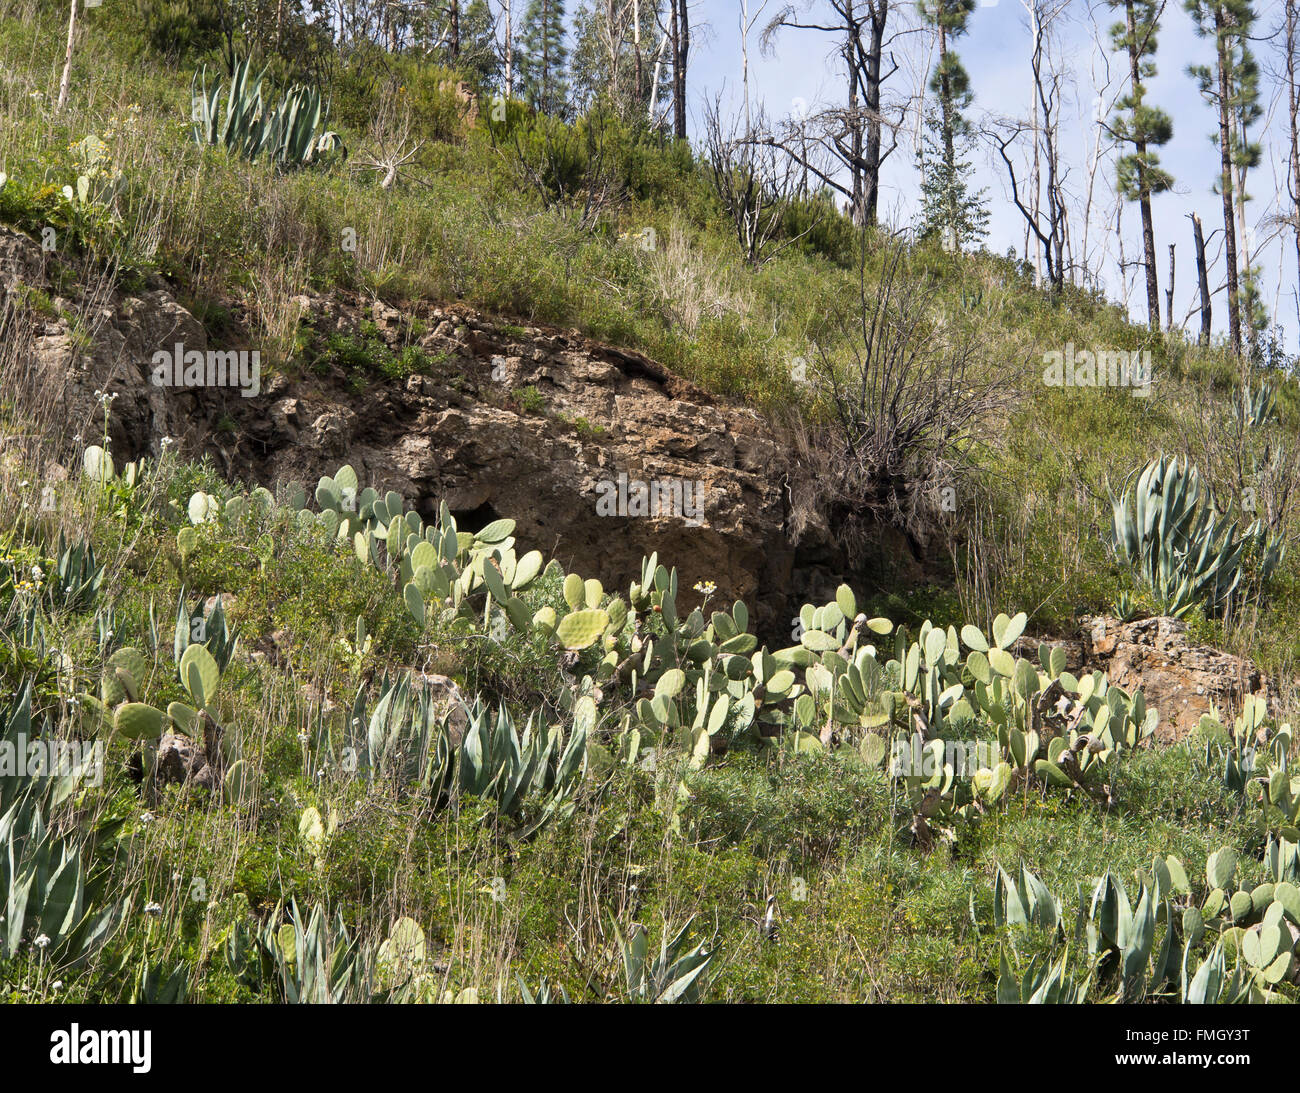 Prickly pear Opuntia dillenii and Agave americana dominating a mountainside near a footpath in Erjos del Tanque, Tenerife Stock Photo